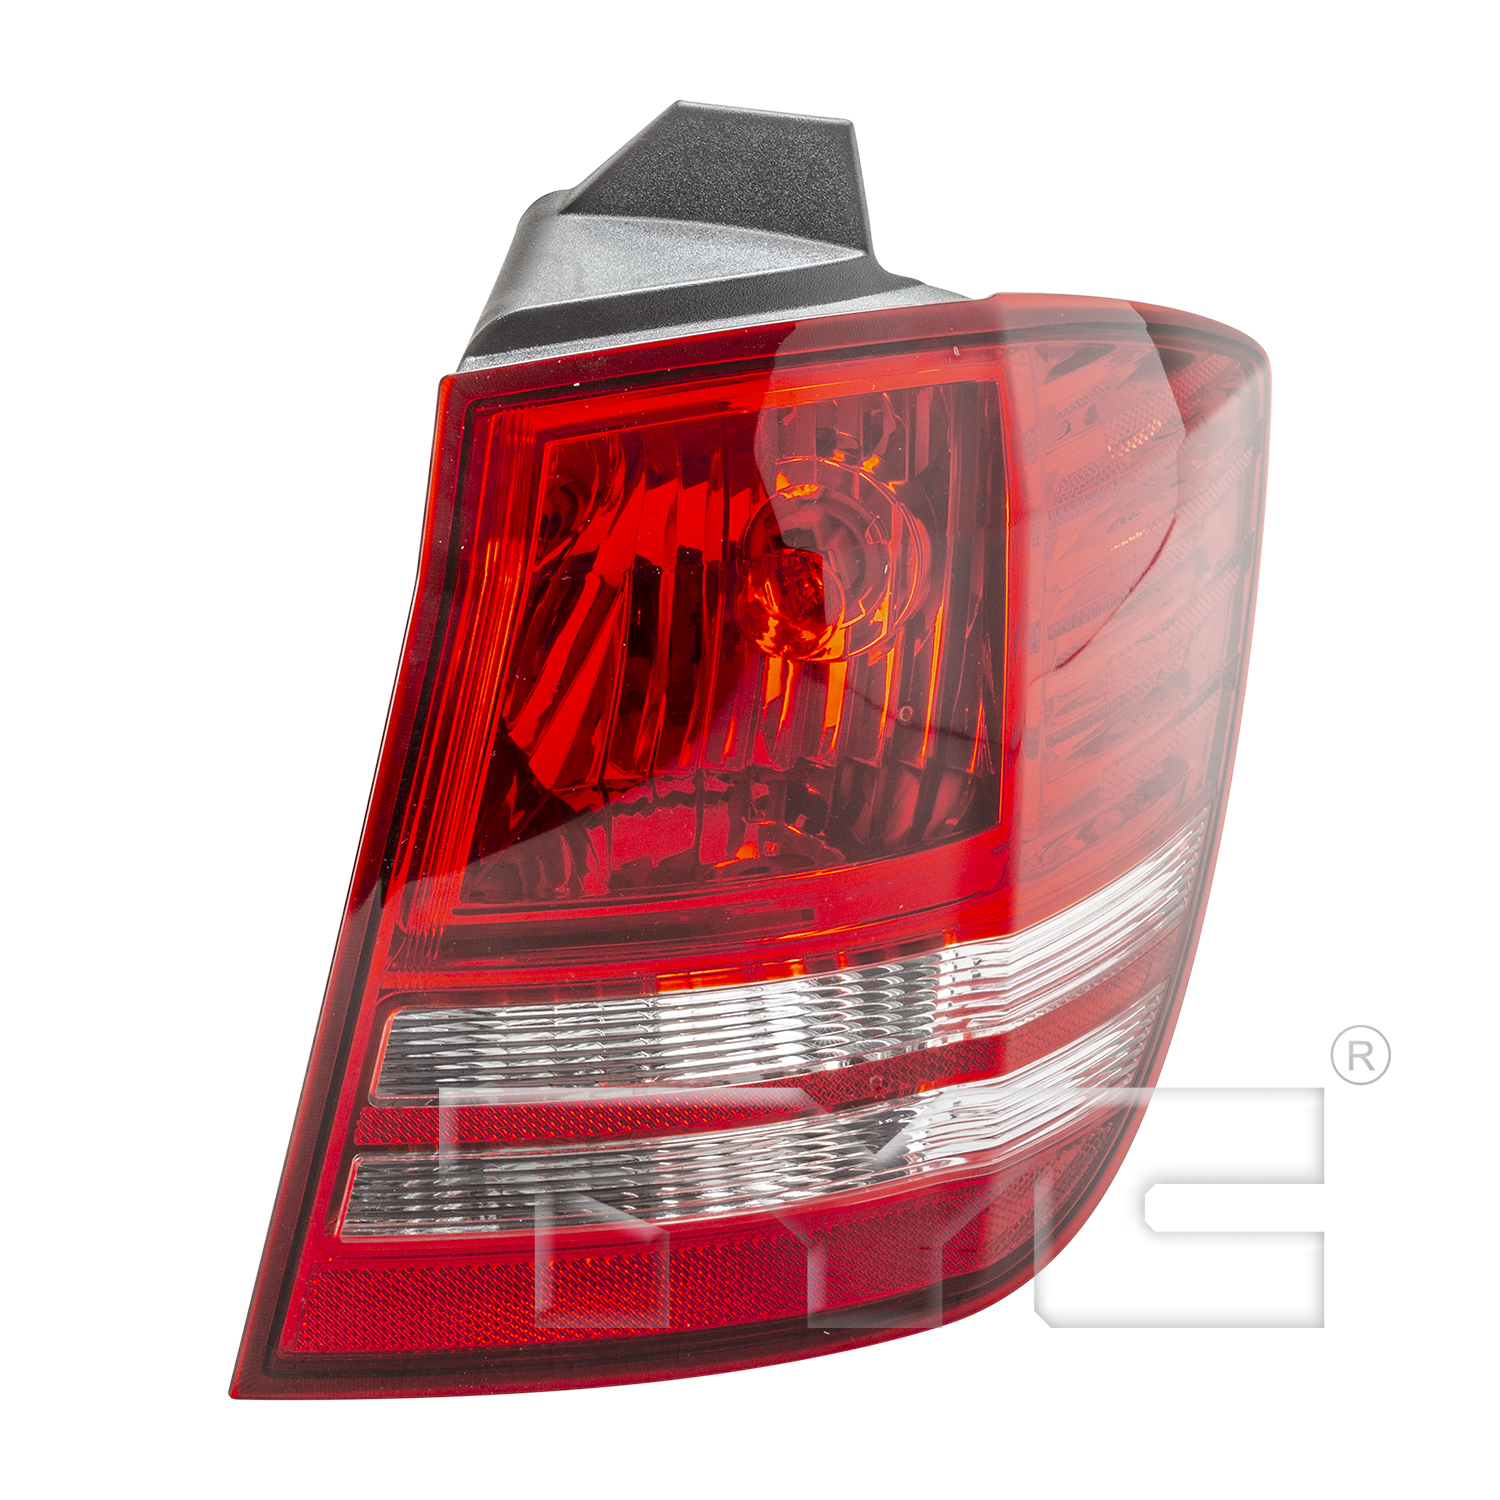 Aftermarket TAILLIGHTS for DODGE - JOURNEY, JOURNEY,10-20,RT Taillamp assy outer